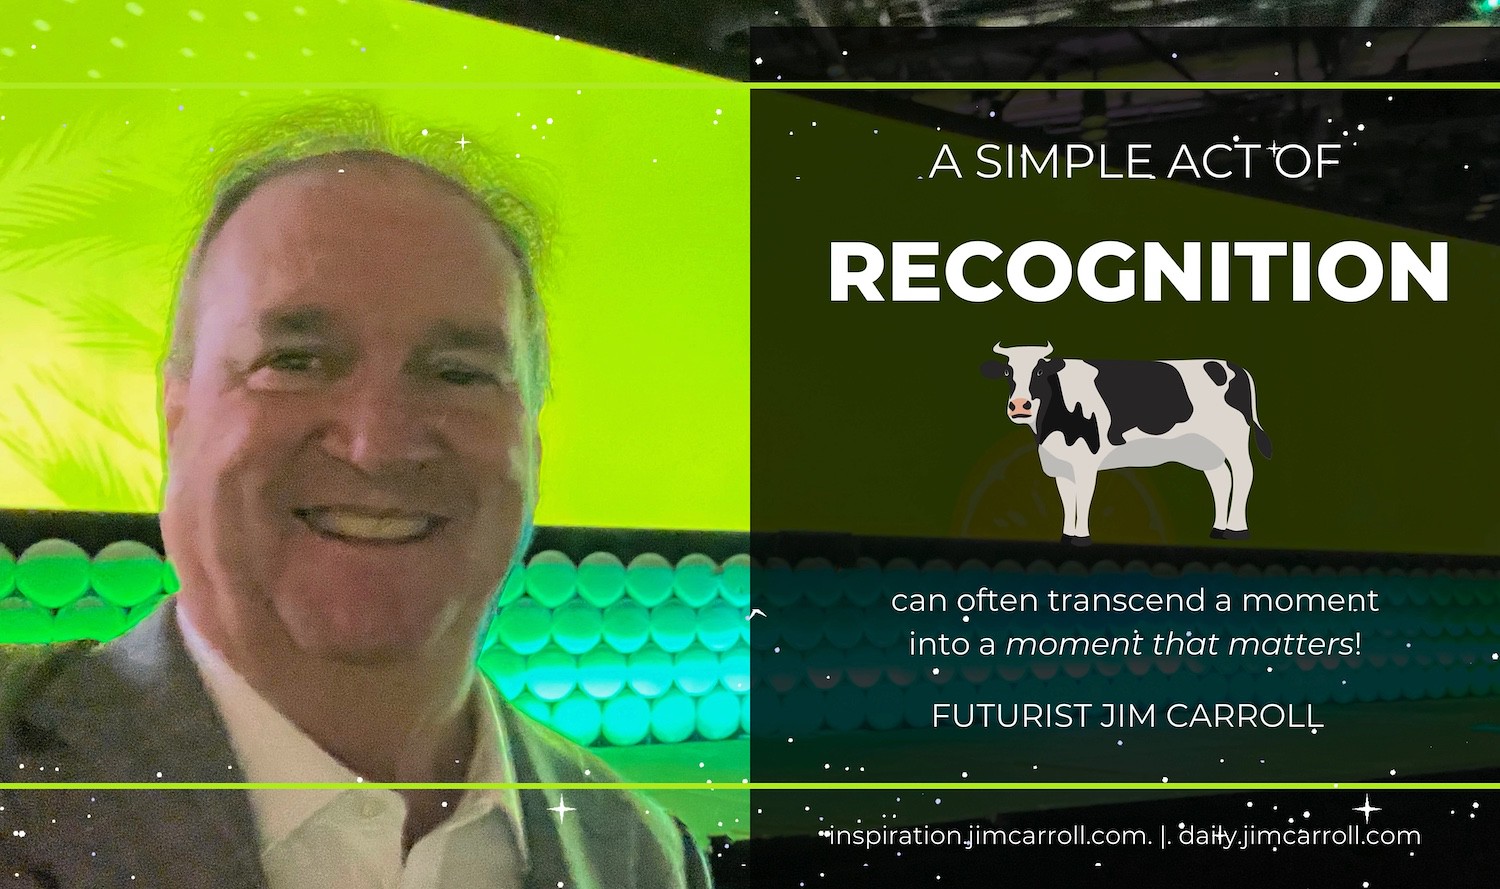 "A simple act of recognition can often transcend a moment into a moment that matters!" - Futurist Jim Carroll